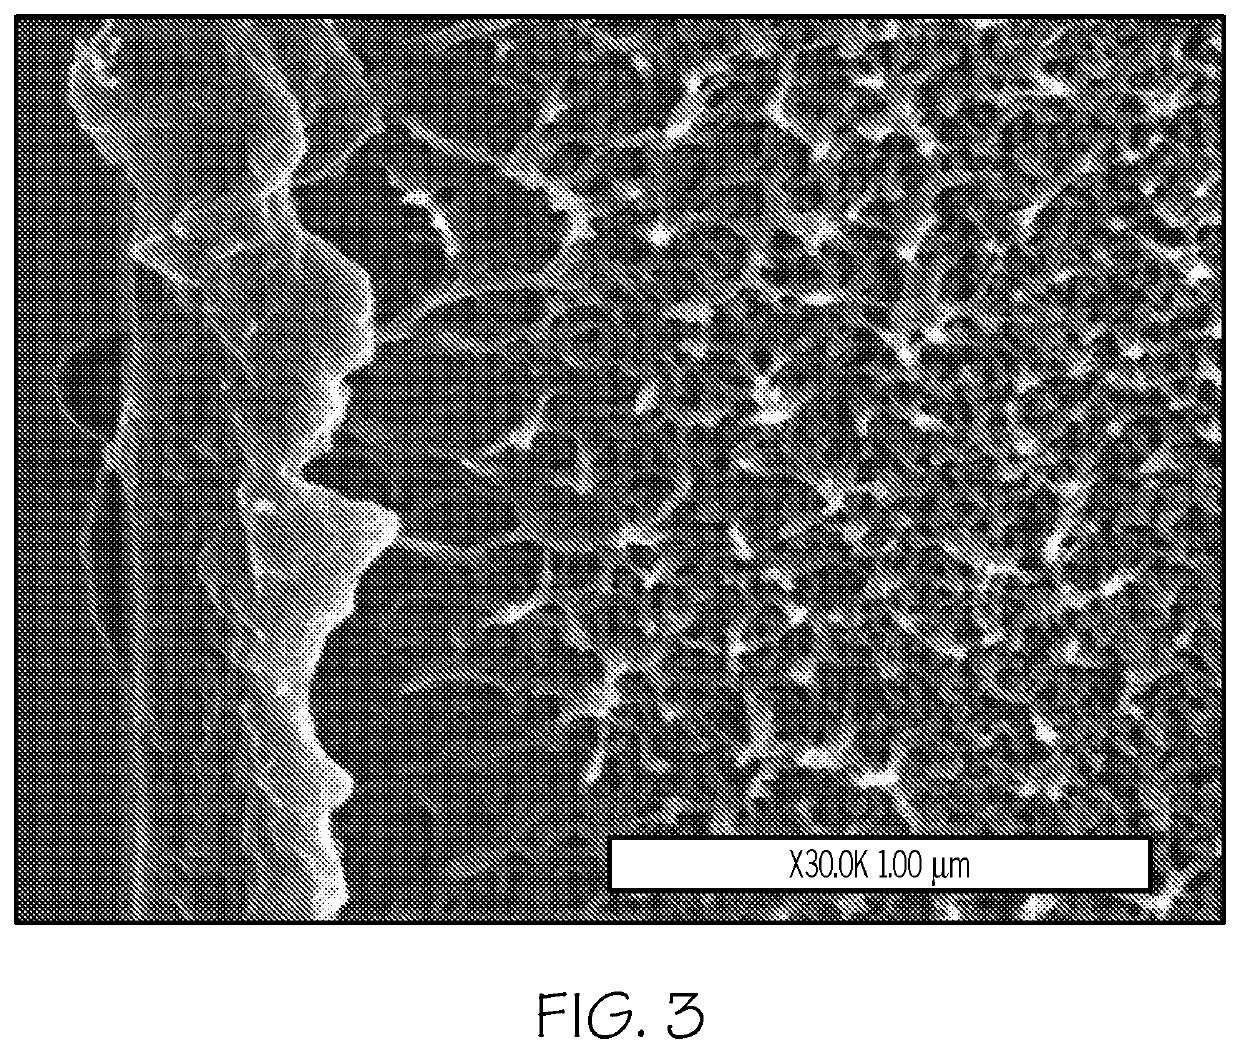 Carbon Molecular Sieve Membrane Produced From A Carbon Forming Polymer-Polyvinylidene Chloride Copolymer Blend